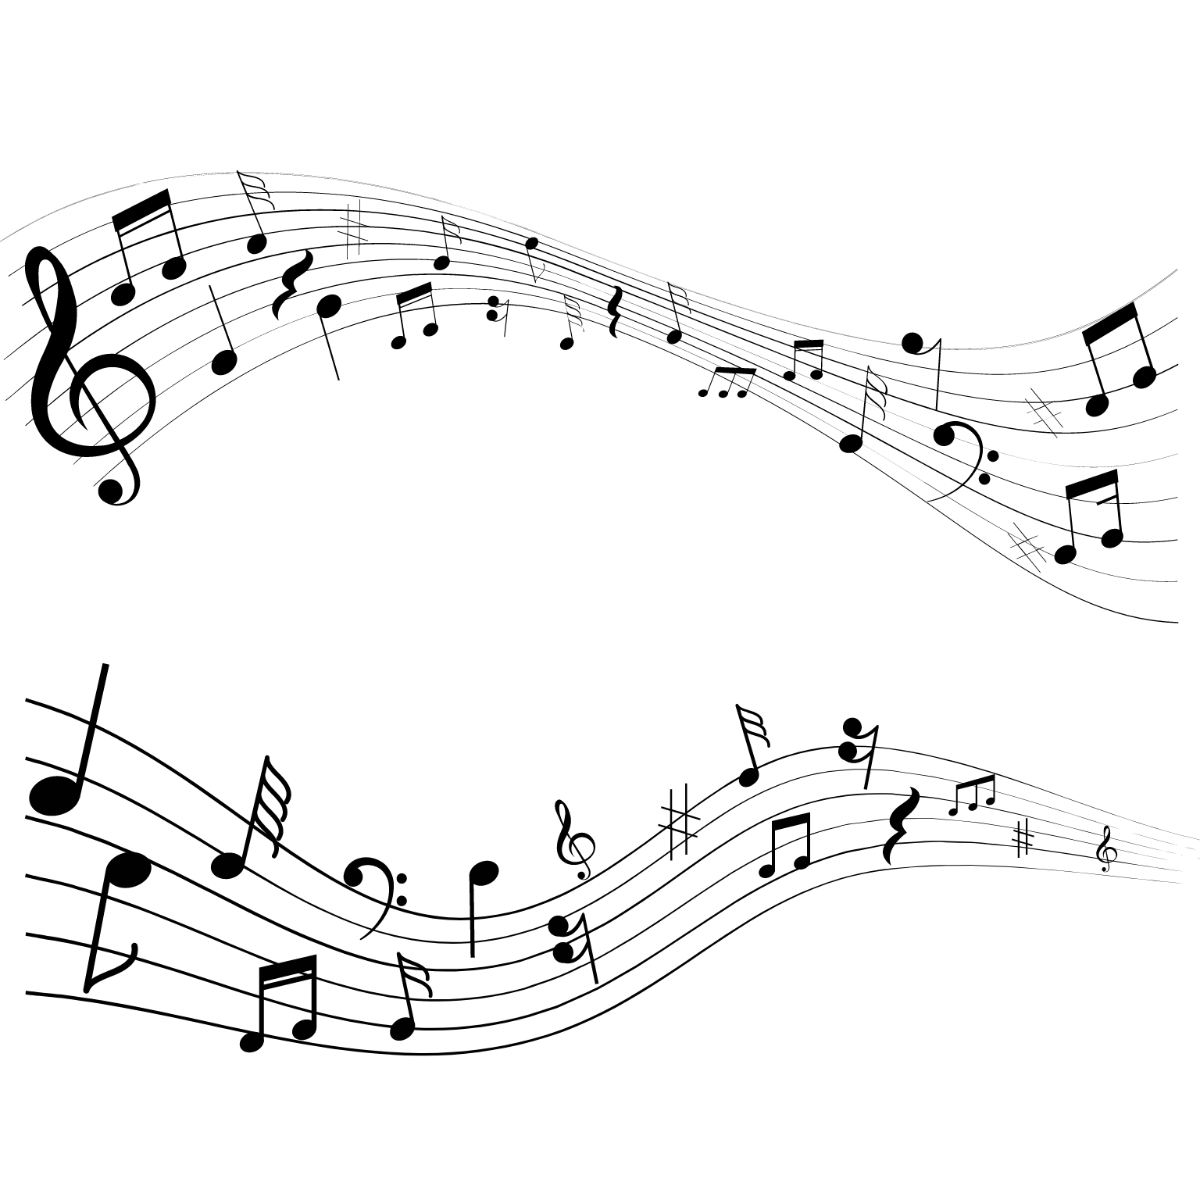 Free Music Chords Vector